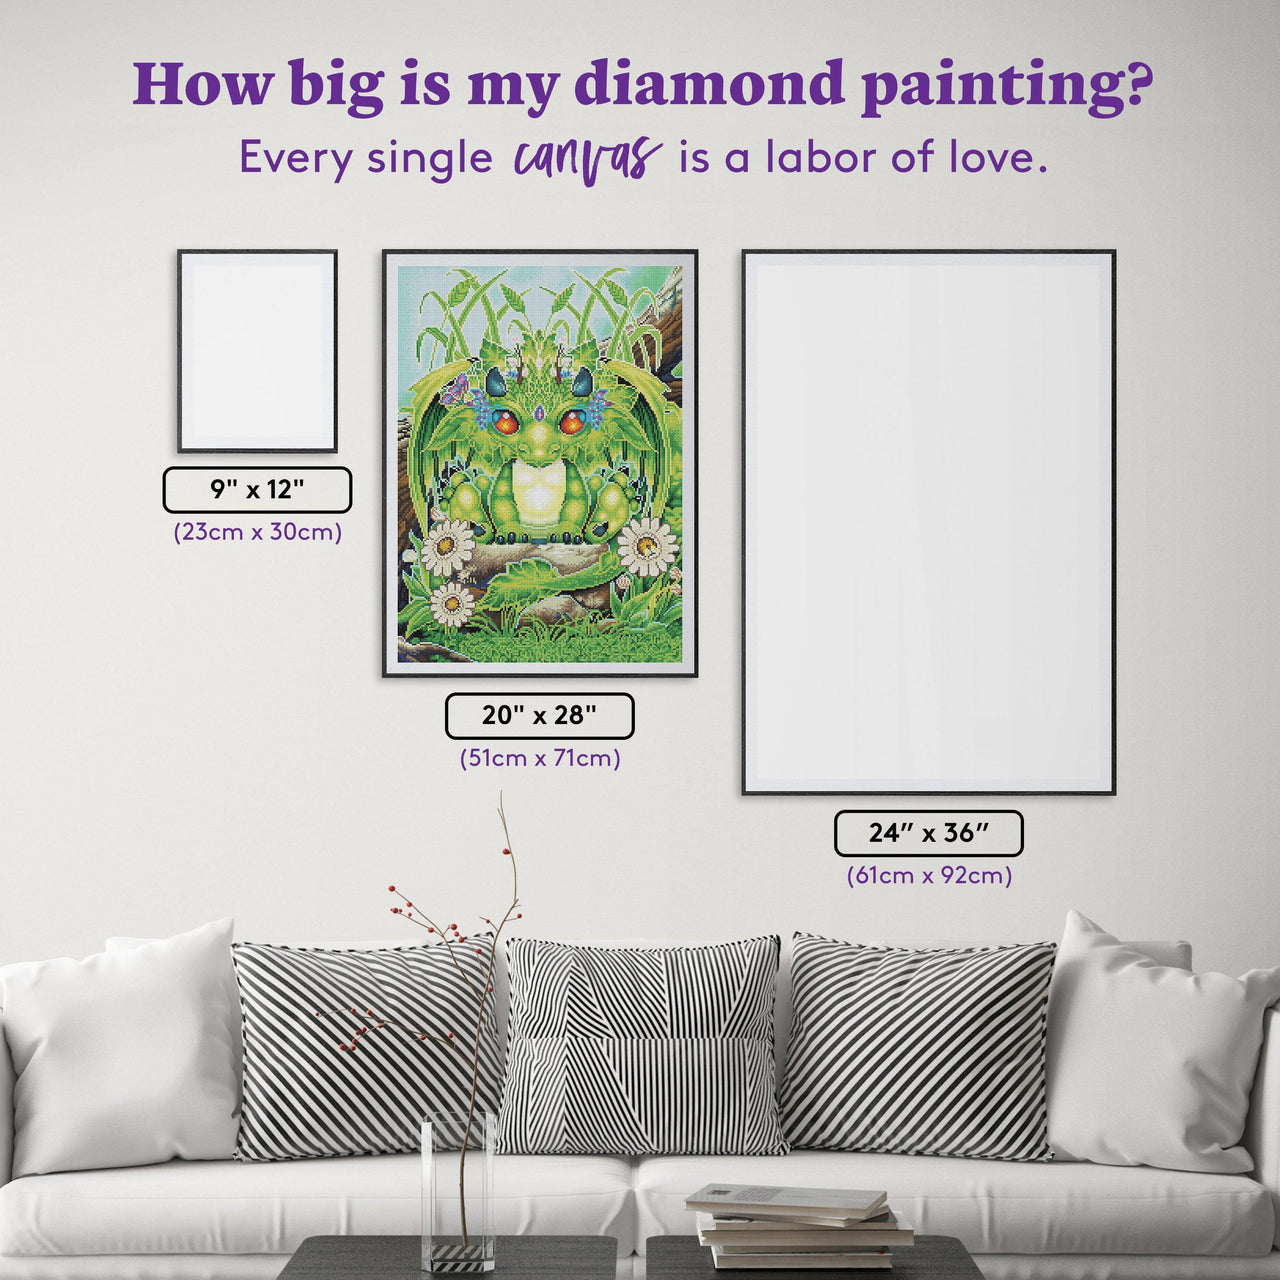 Diamond Painting Love Your Inner Child 20" x 28" (51cm x 71cm) / Round With 56 Colors Including 5 ABs / 45,612